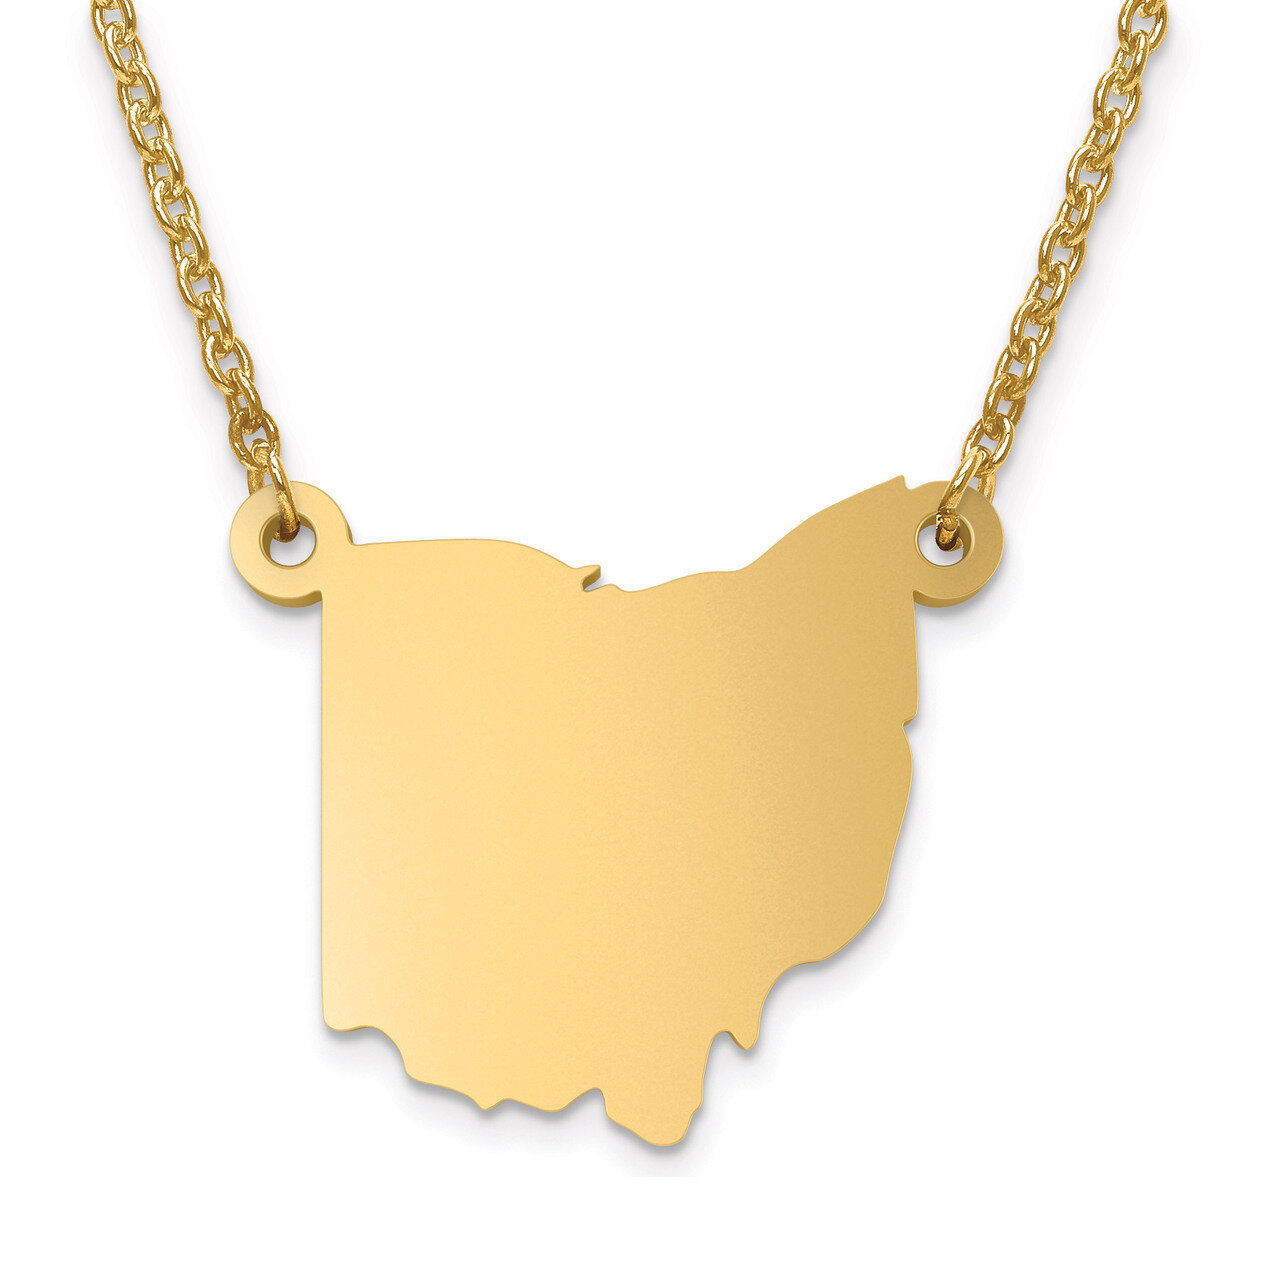 Ohio State Pendant with Chain Engravable Gold-plated on Sterling Silver